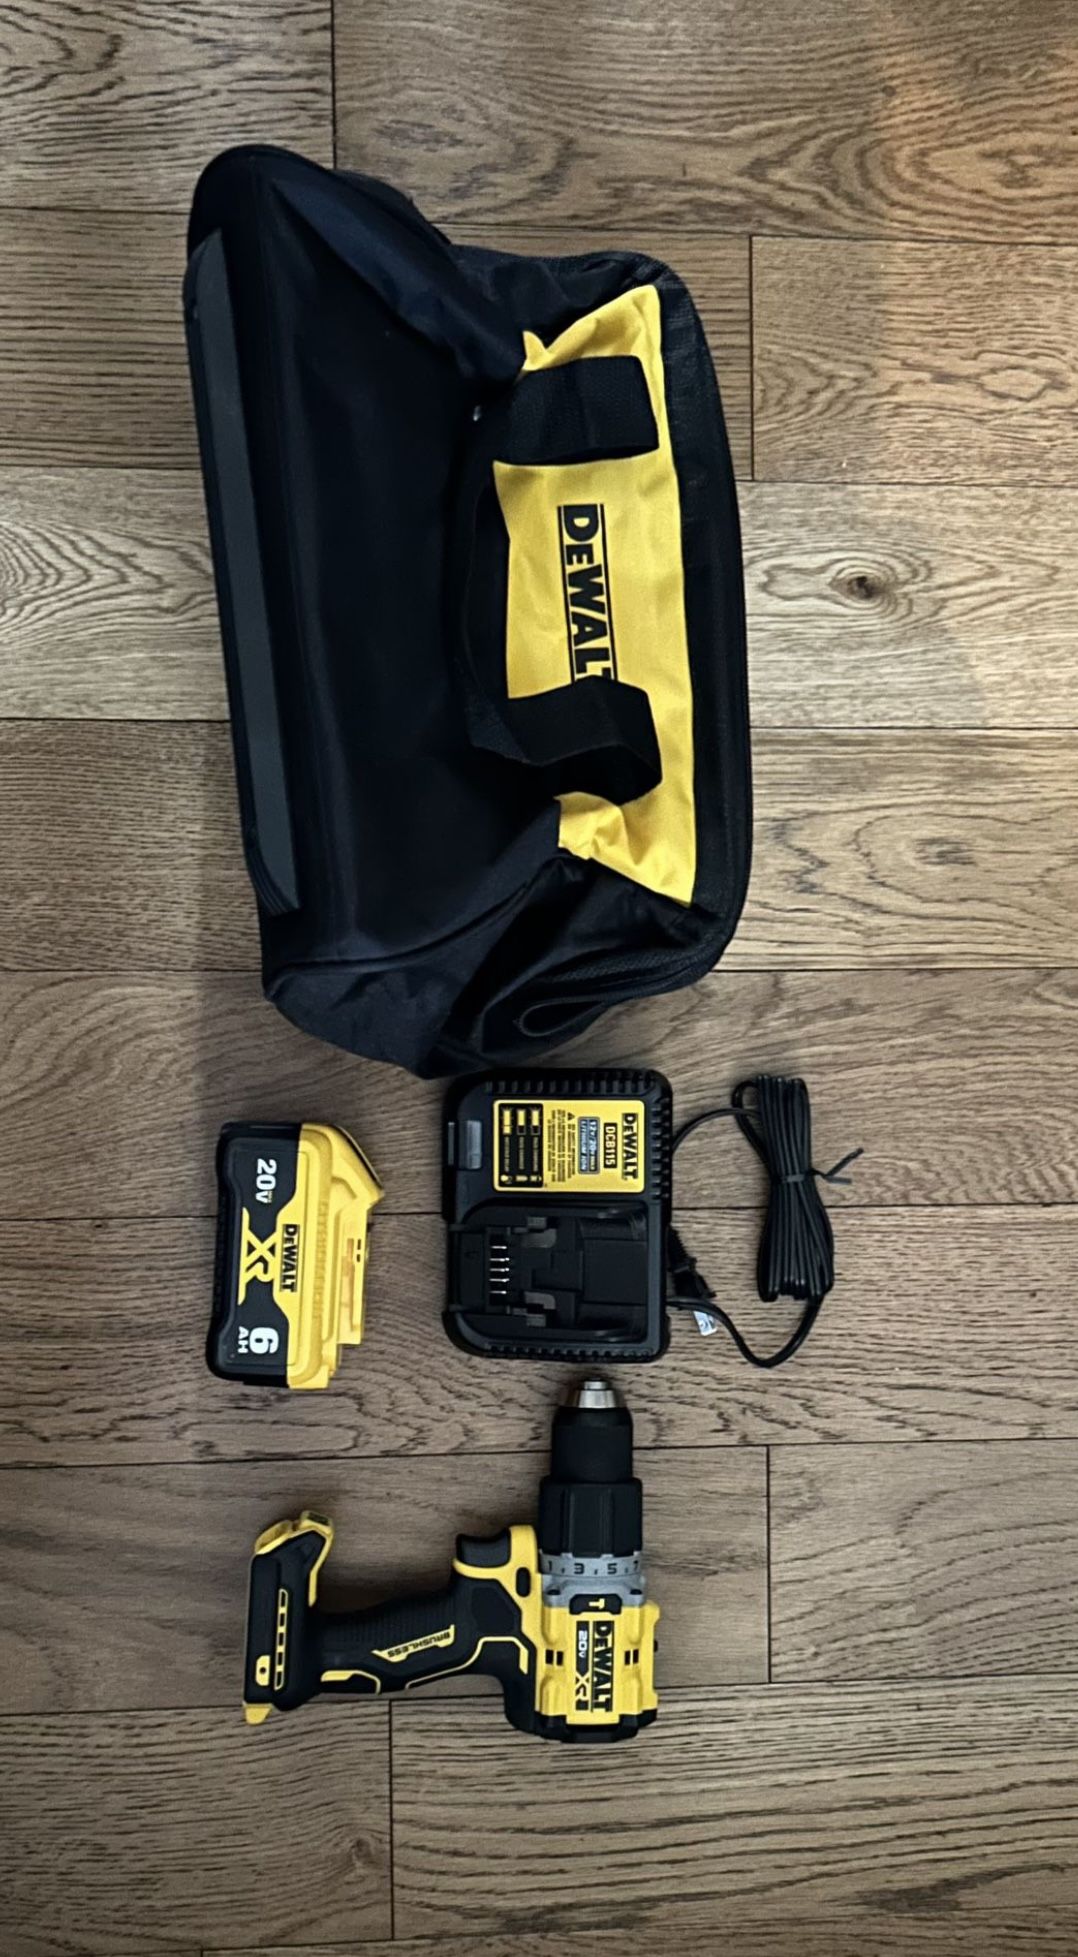 DeWalt Drill Driver W/ Battery and Charger + Extras